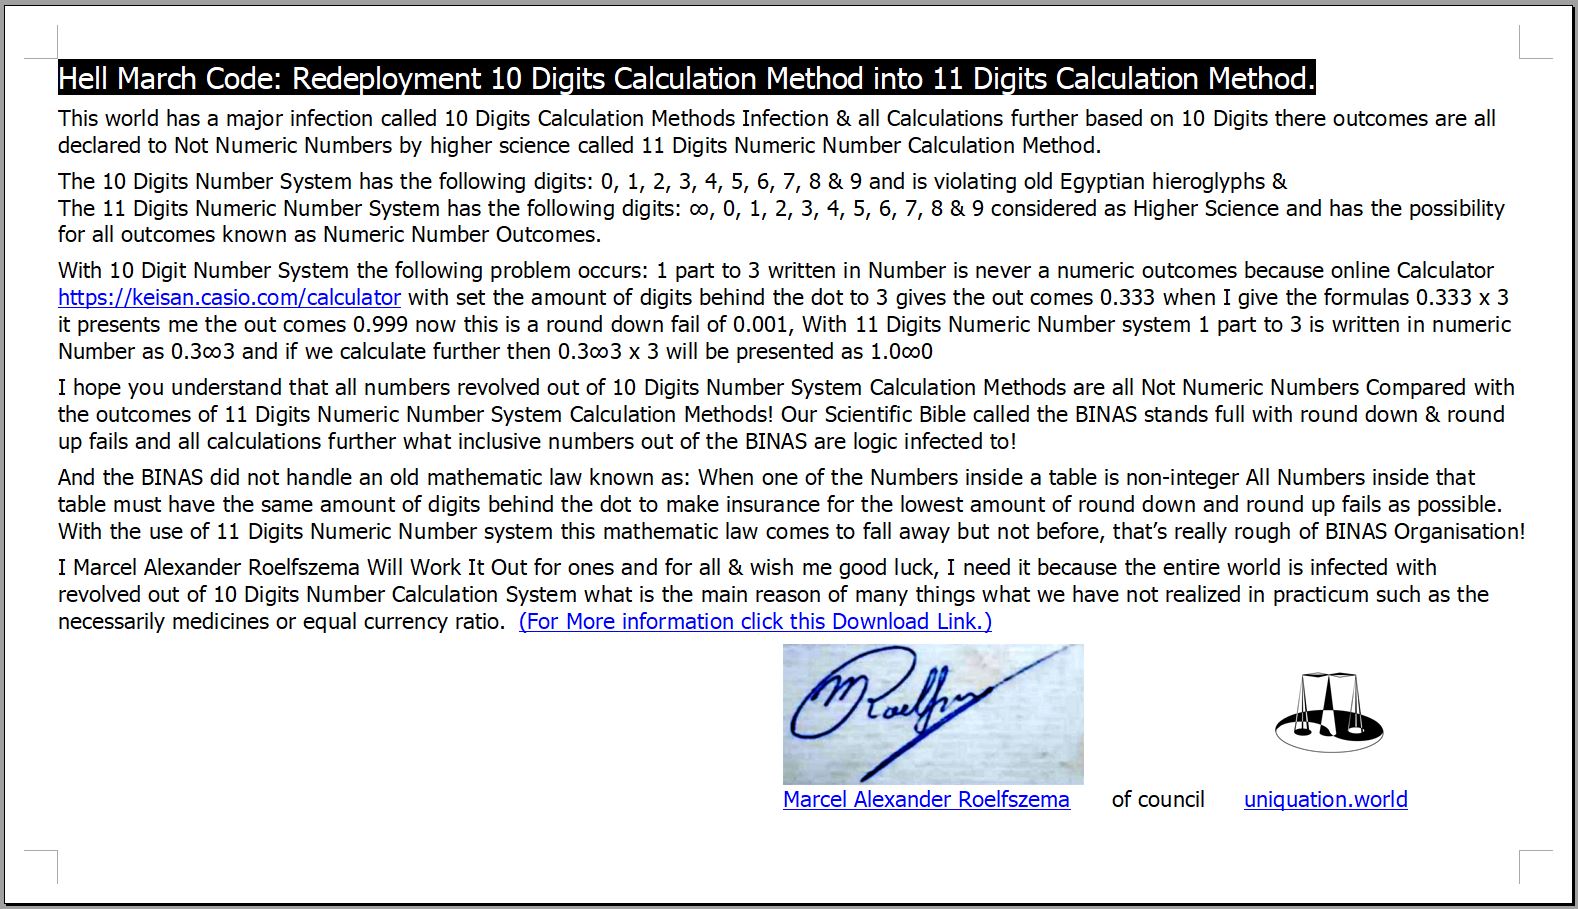 Hell March Code Redeployment Calculation Method From 10 Digits Into 11 Digits